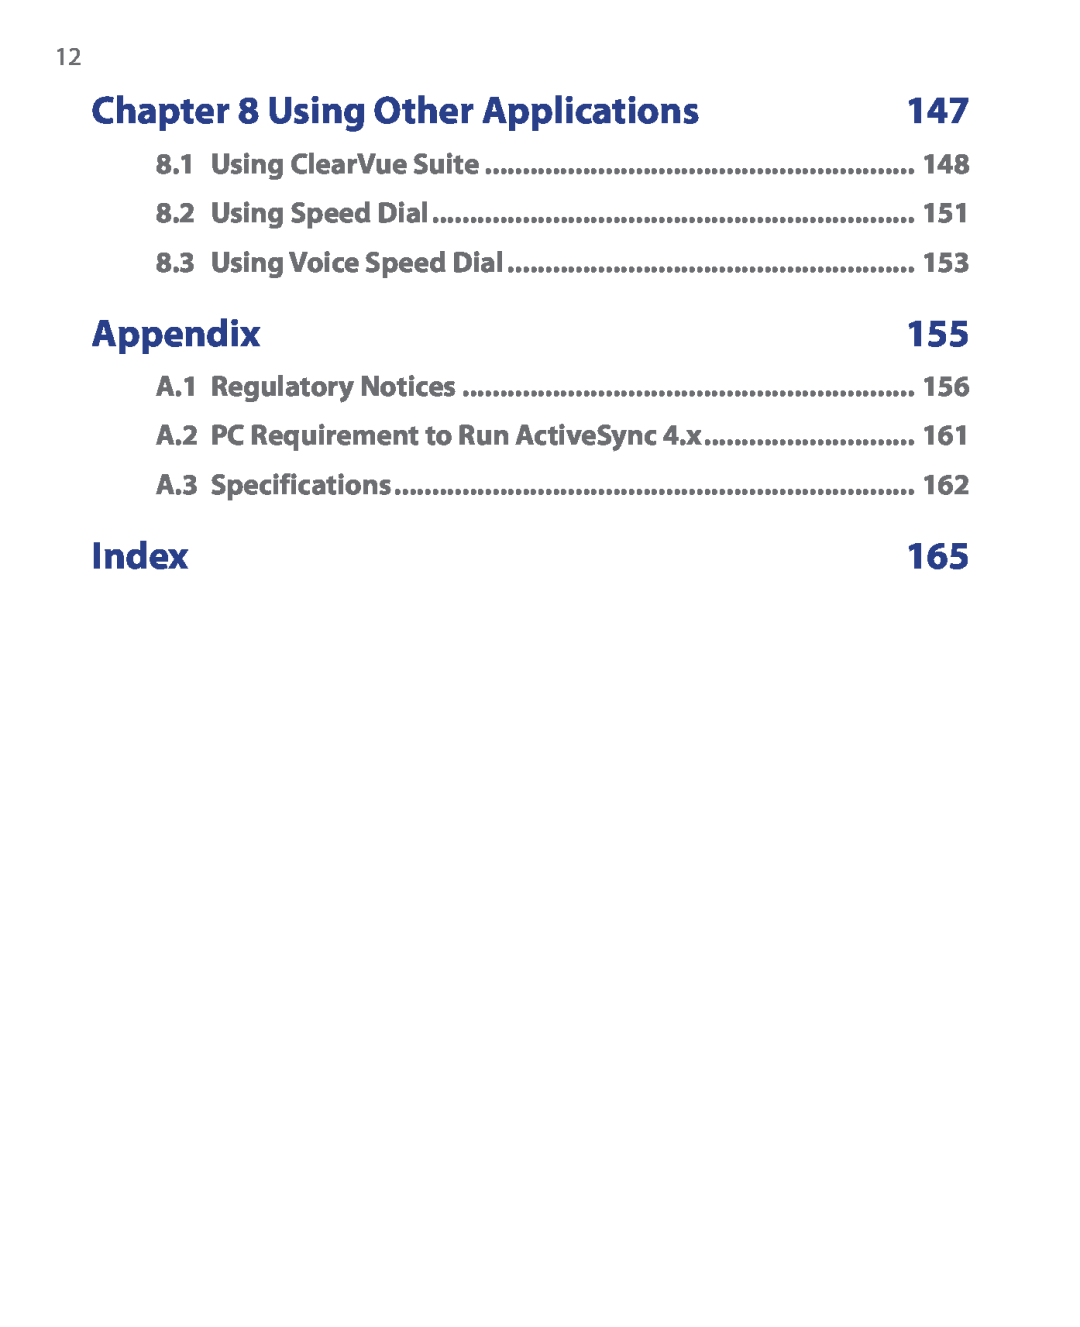 HTC HTC S621 user manual Using Other Applications, Appendix, Index 